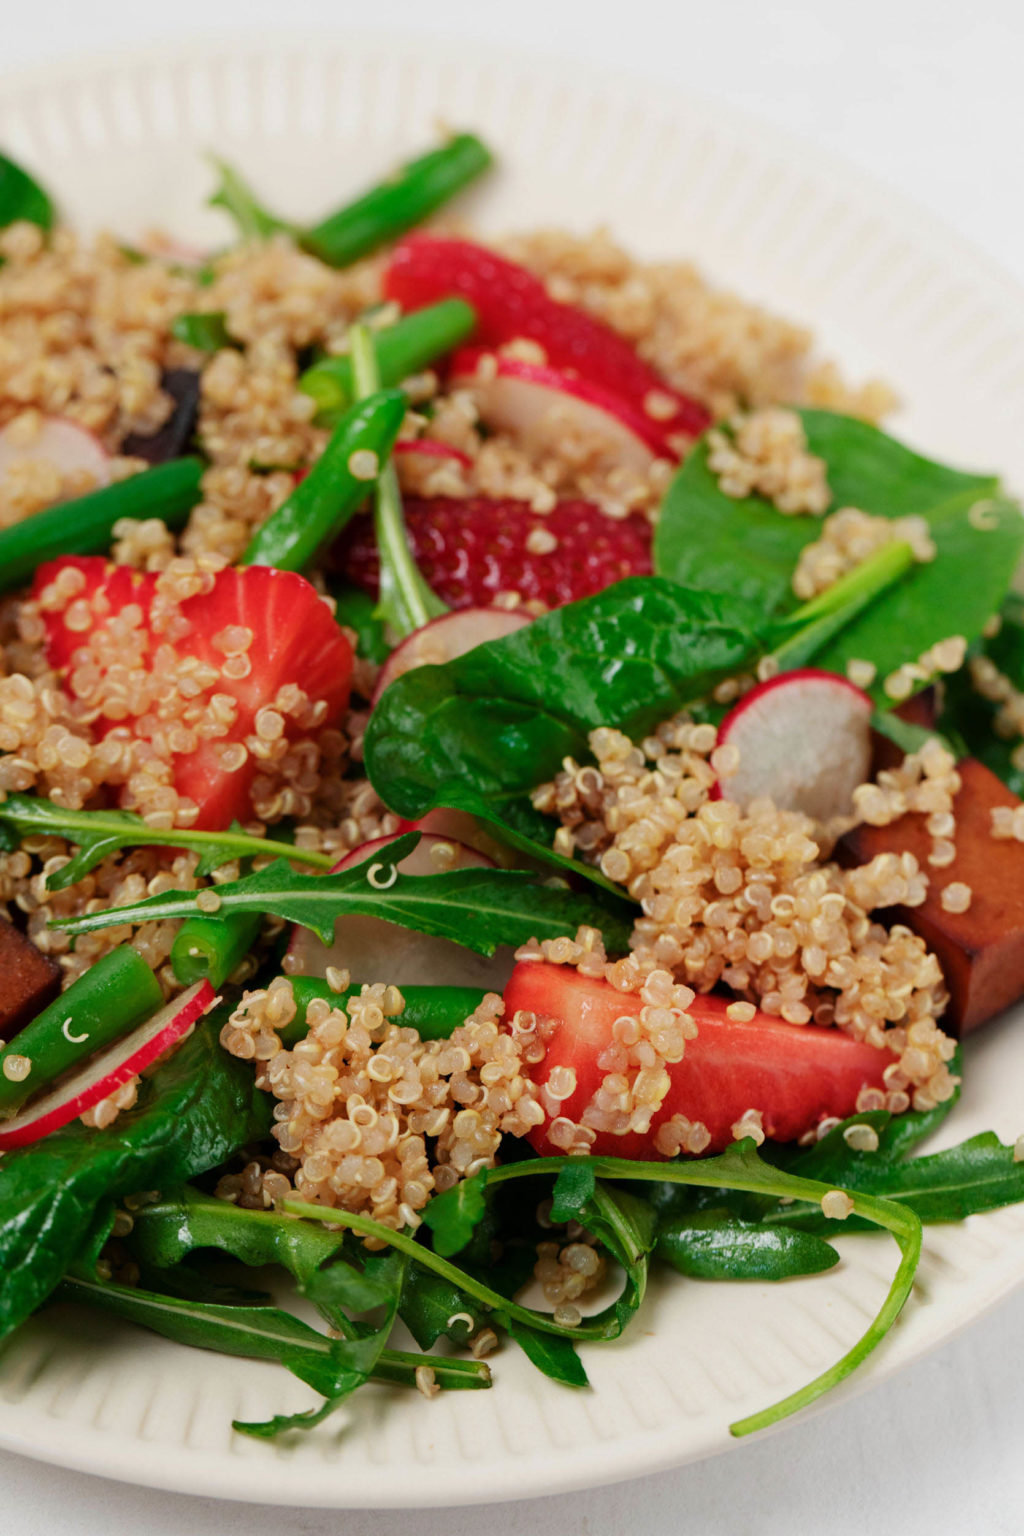 A close-up image of spinach leaves, radishes, cooked grains, strawberries, and spinach, all arranged on a white serving plate.